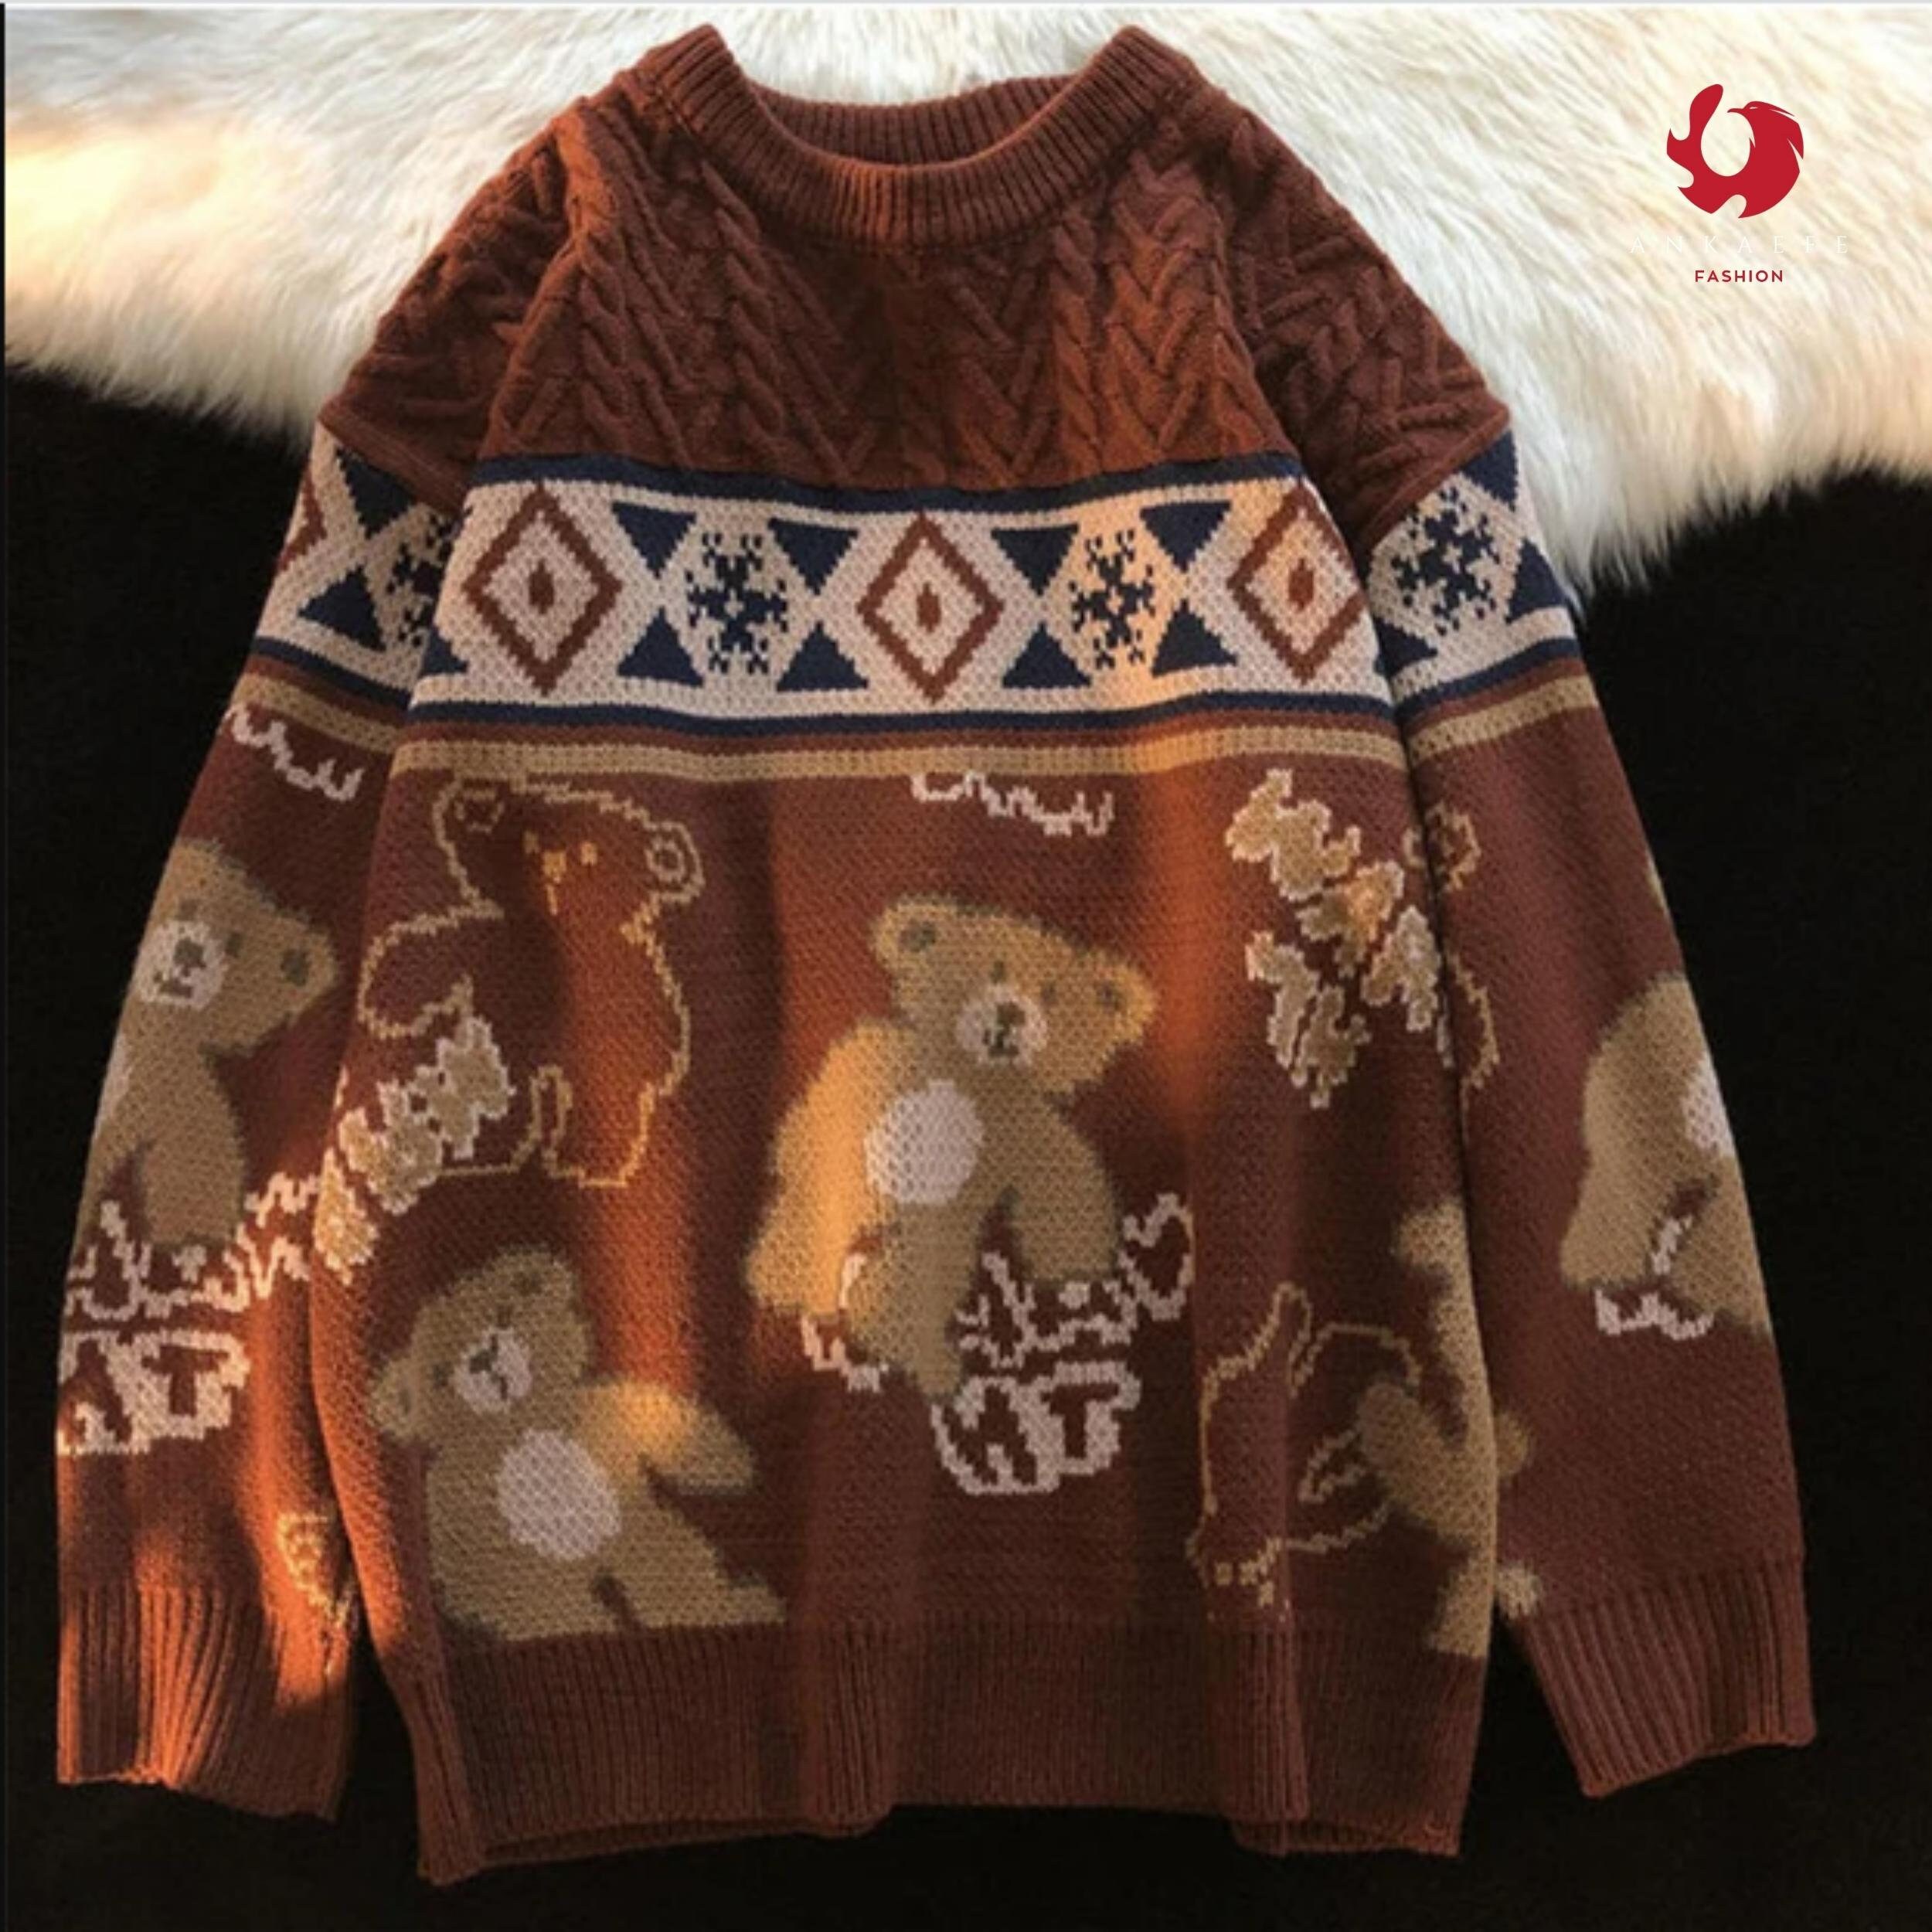 Vintage Teddy Bear Sweater Size up Recommended Tops - Etsy